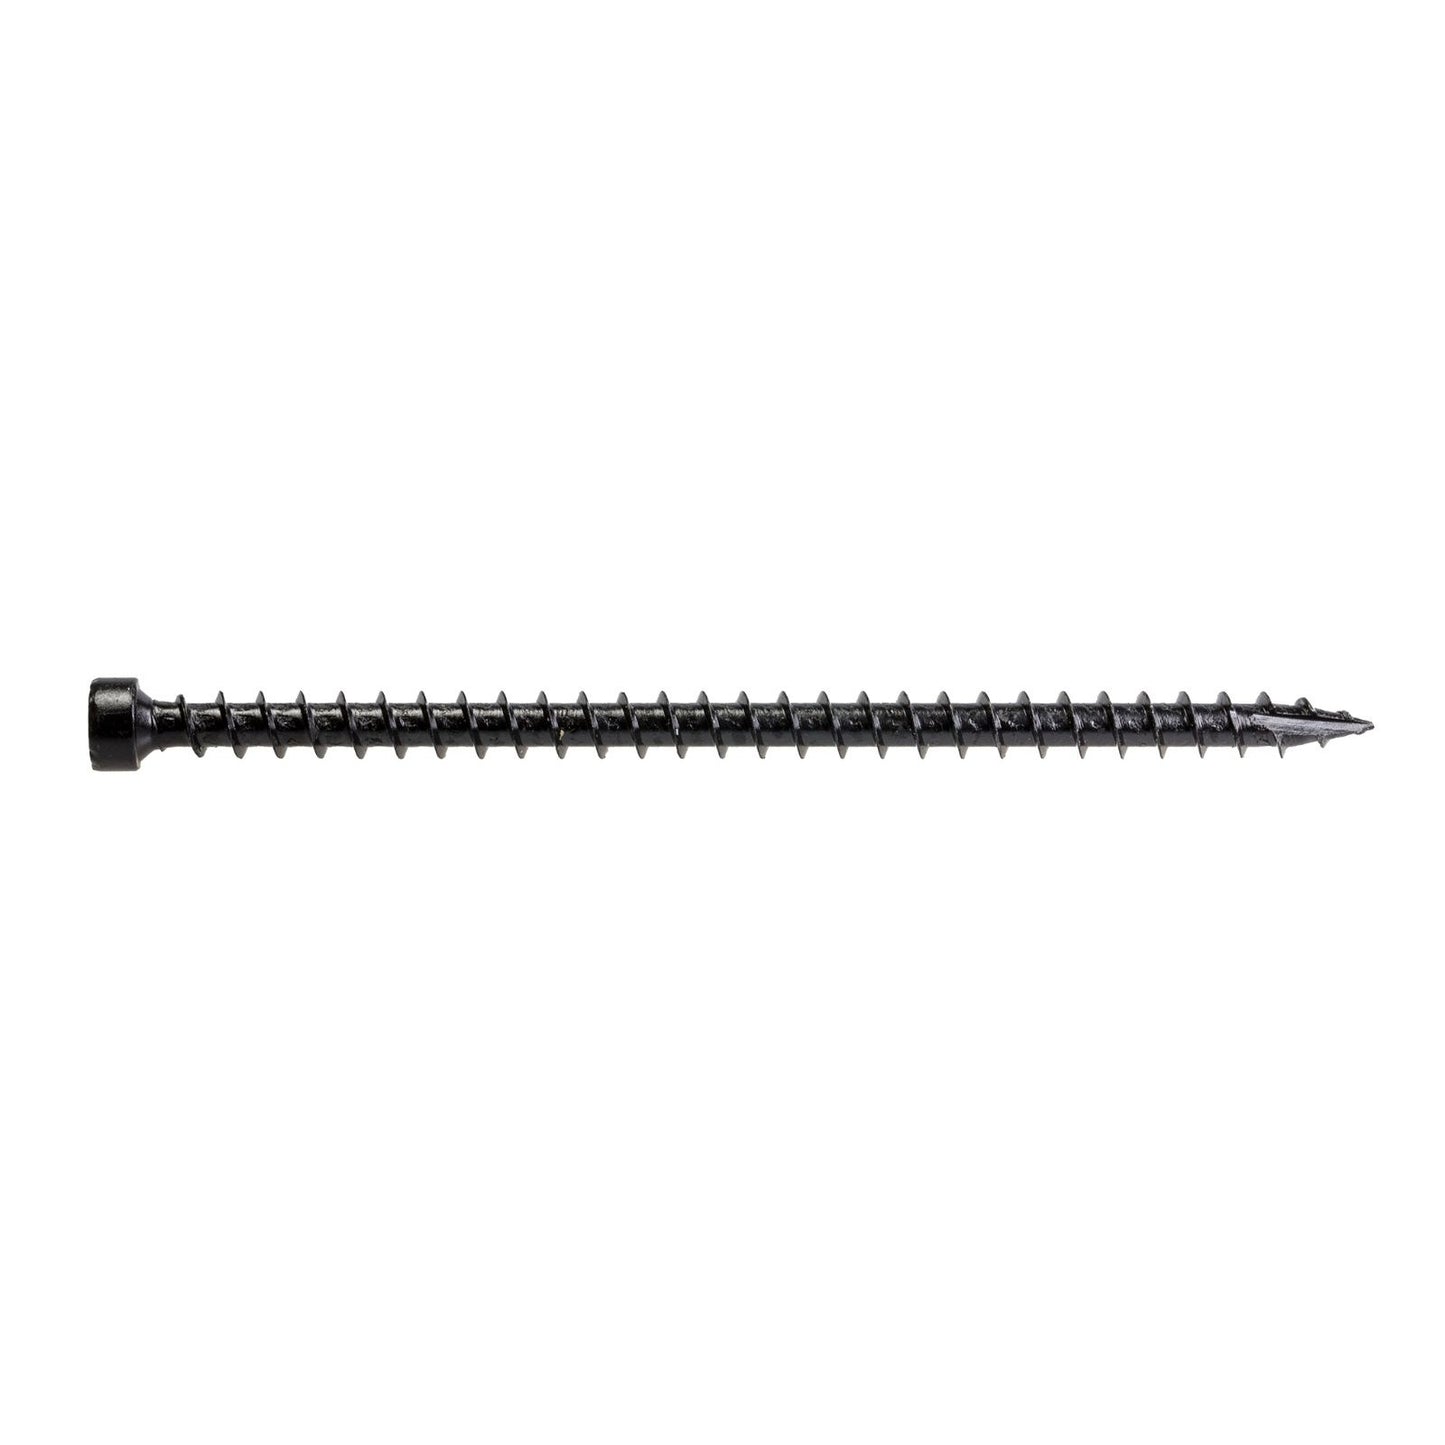 0152 inch x 412 inch StrongTie SDWC Truss Plate Structural Screw E Coat Pkg 500